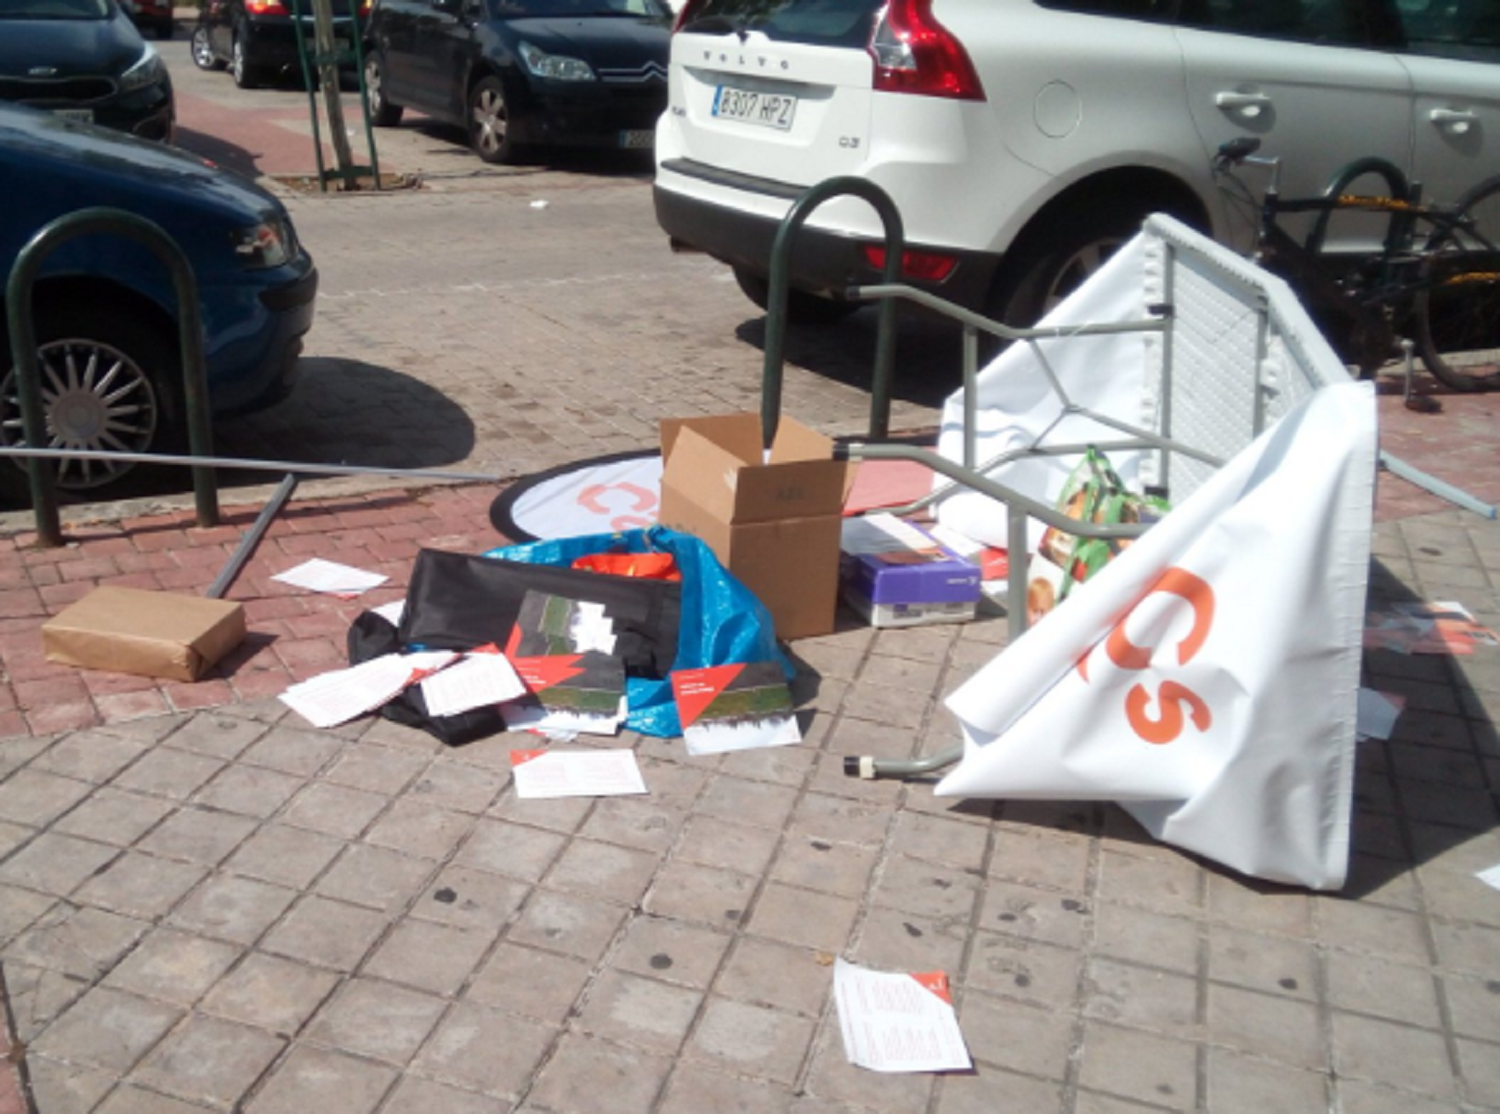 Attack on promotional stand for Ciudadanos party in Madrid